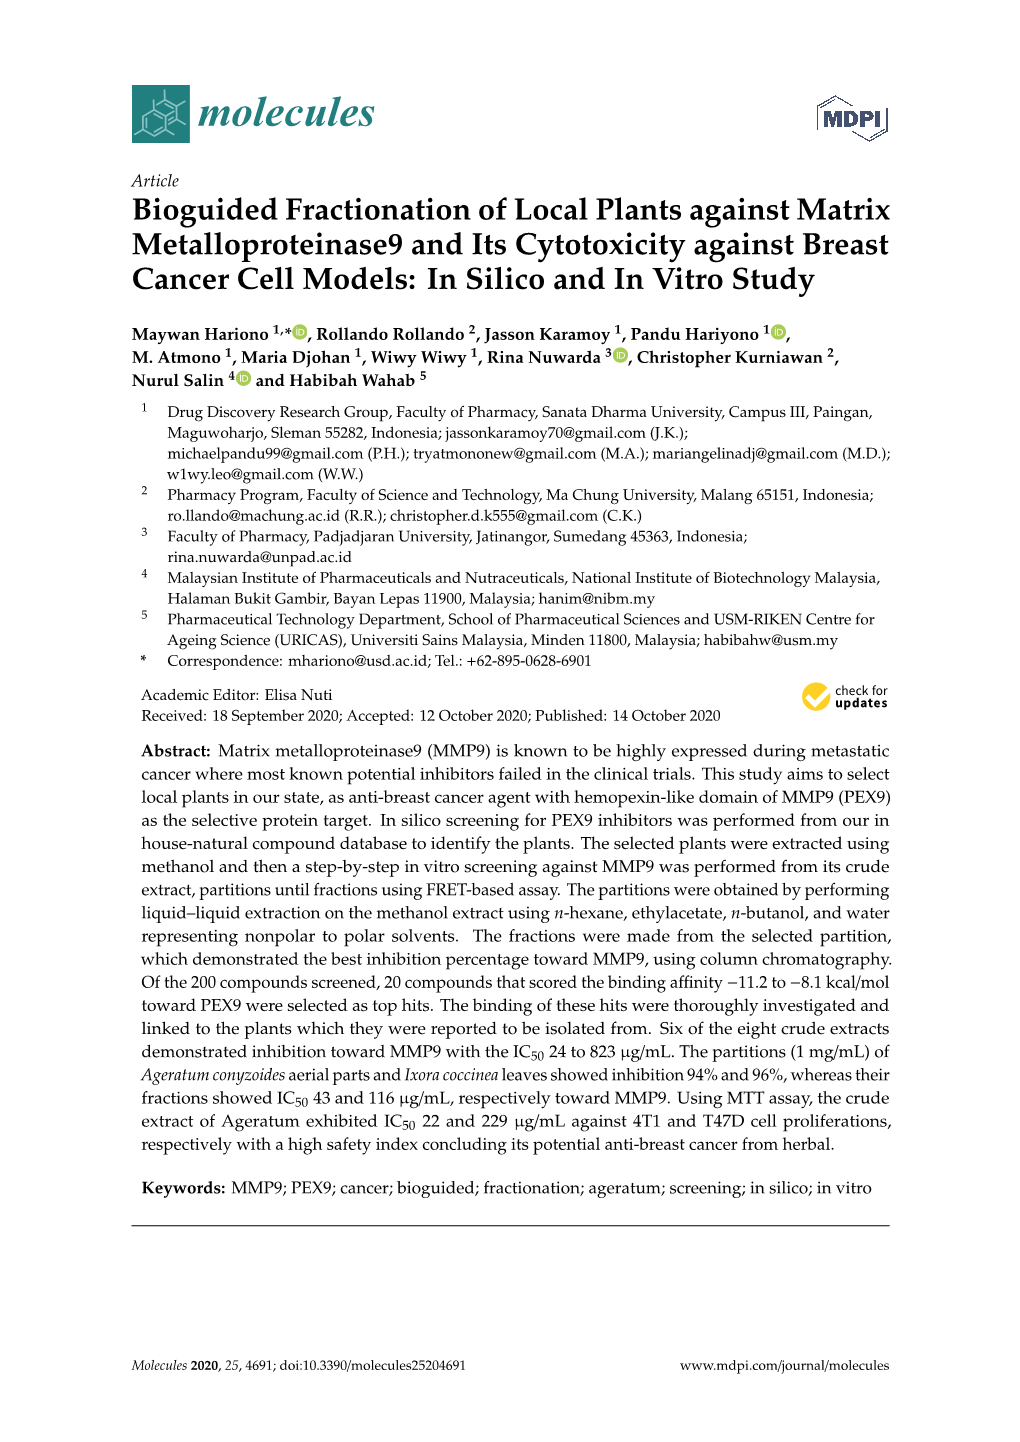 Bioguided Fractionation of Local Plants Against Matrix Metalloproteinase9 and Its Cytotoxicity Against Breast Cancer Cell Models: in Silico and in Vitro Study